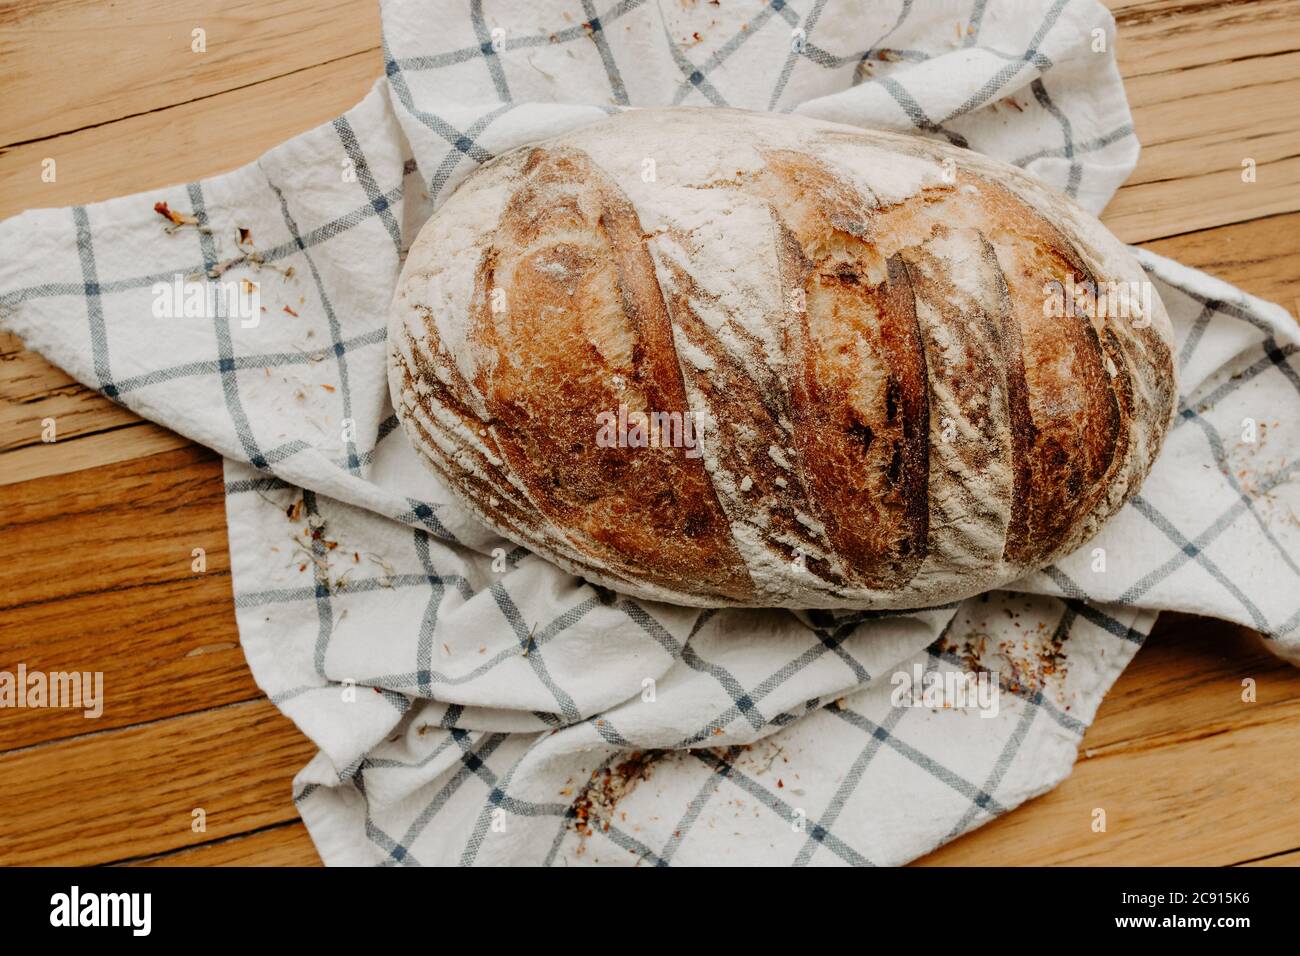 Home made Sour dough bread cooling on a tea towel which is on a wooden chopping platter board, wild dried flowers are sprinkled around Stock Photo